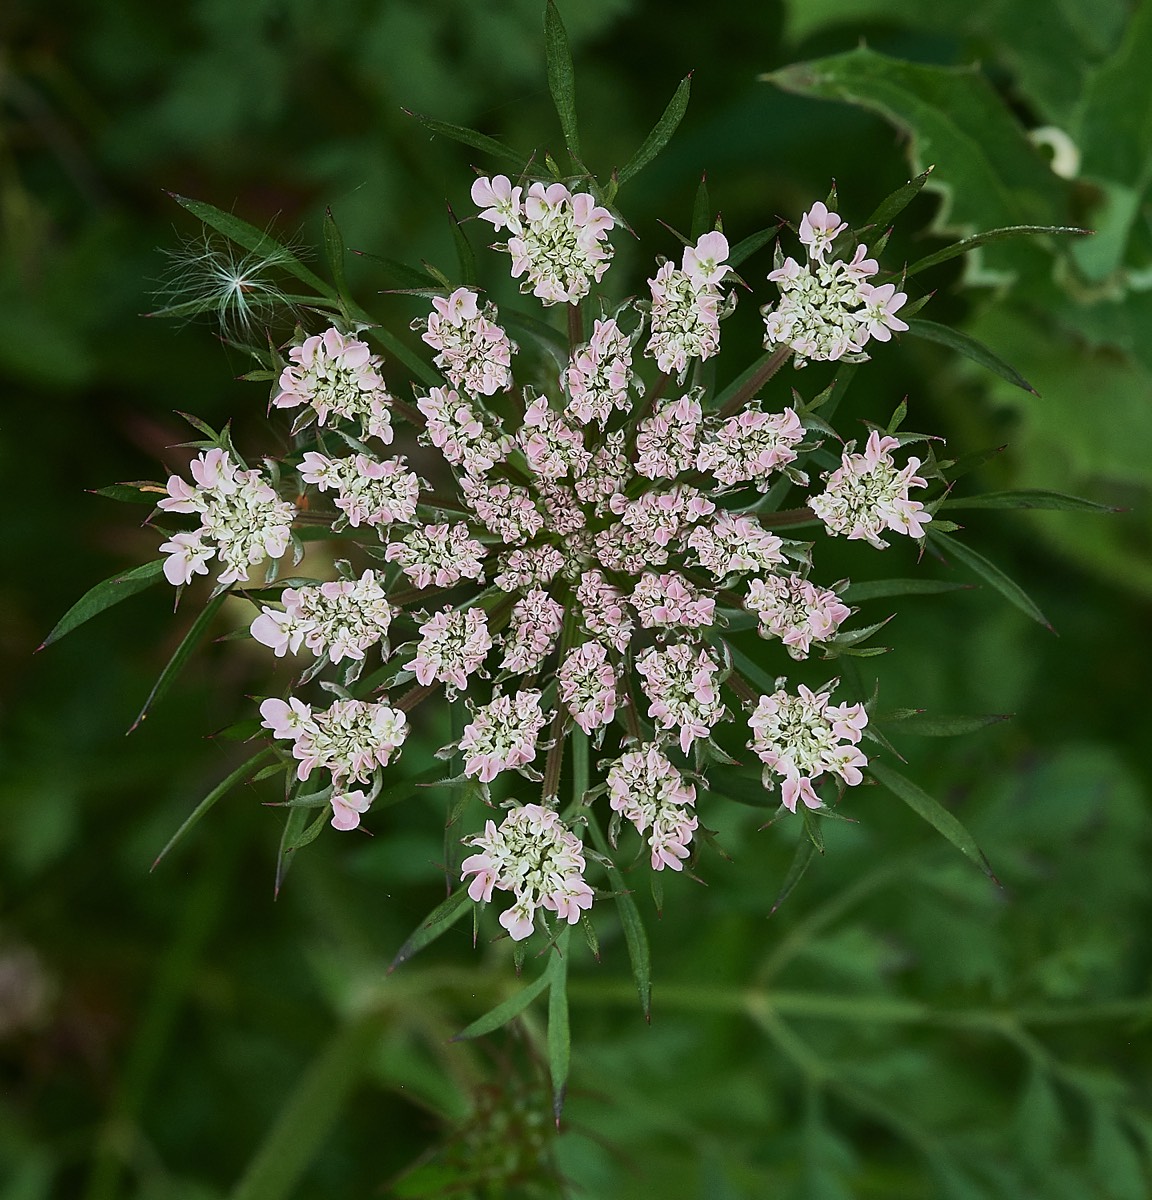 Wild Carrot - Cley 07/07/21